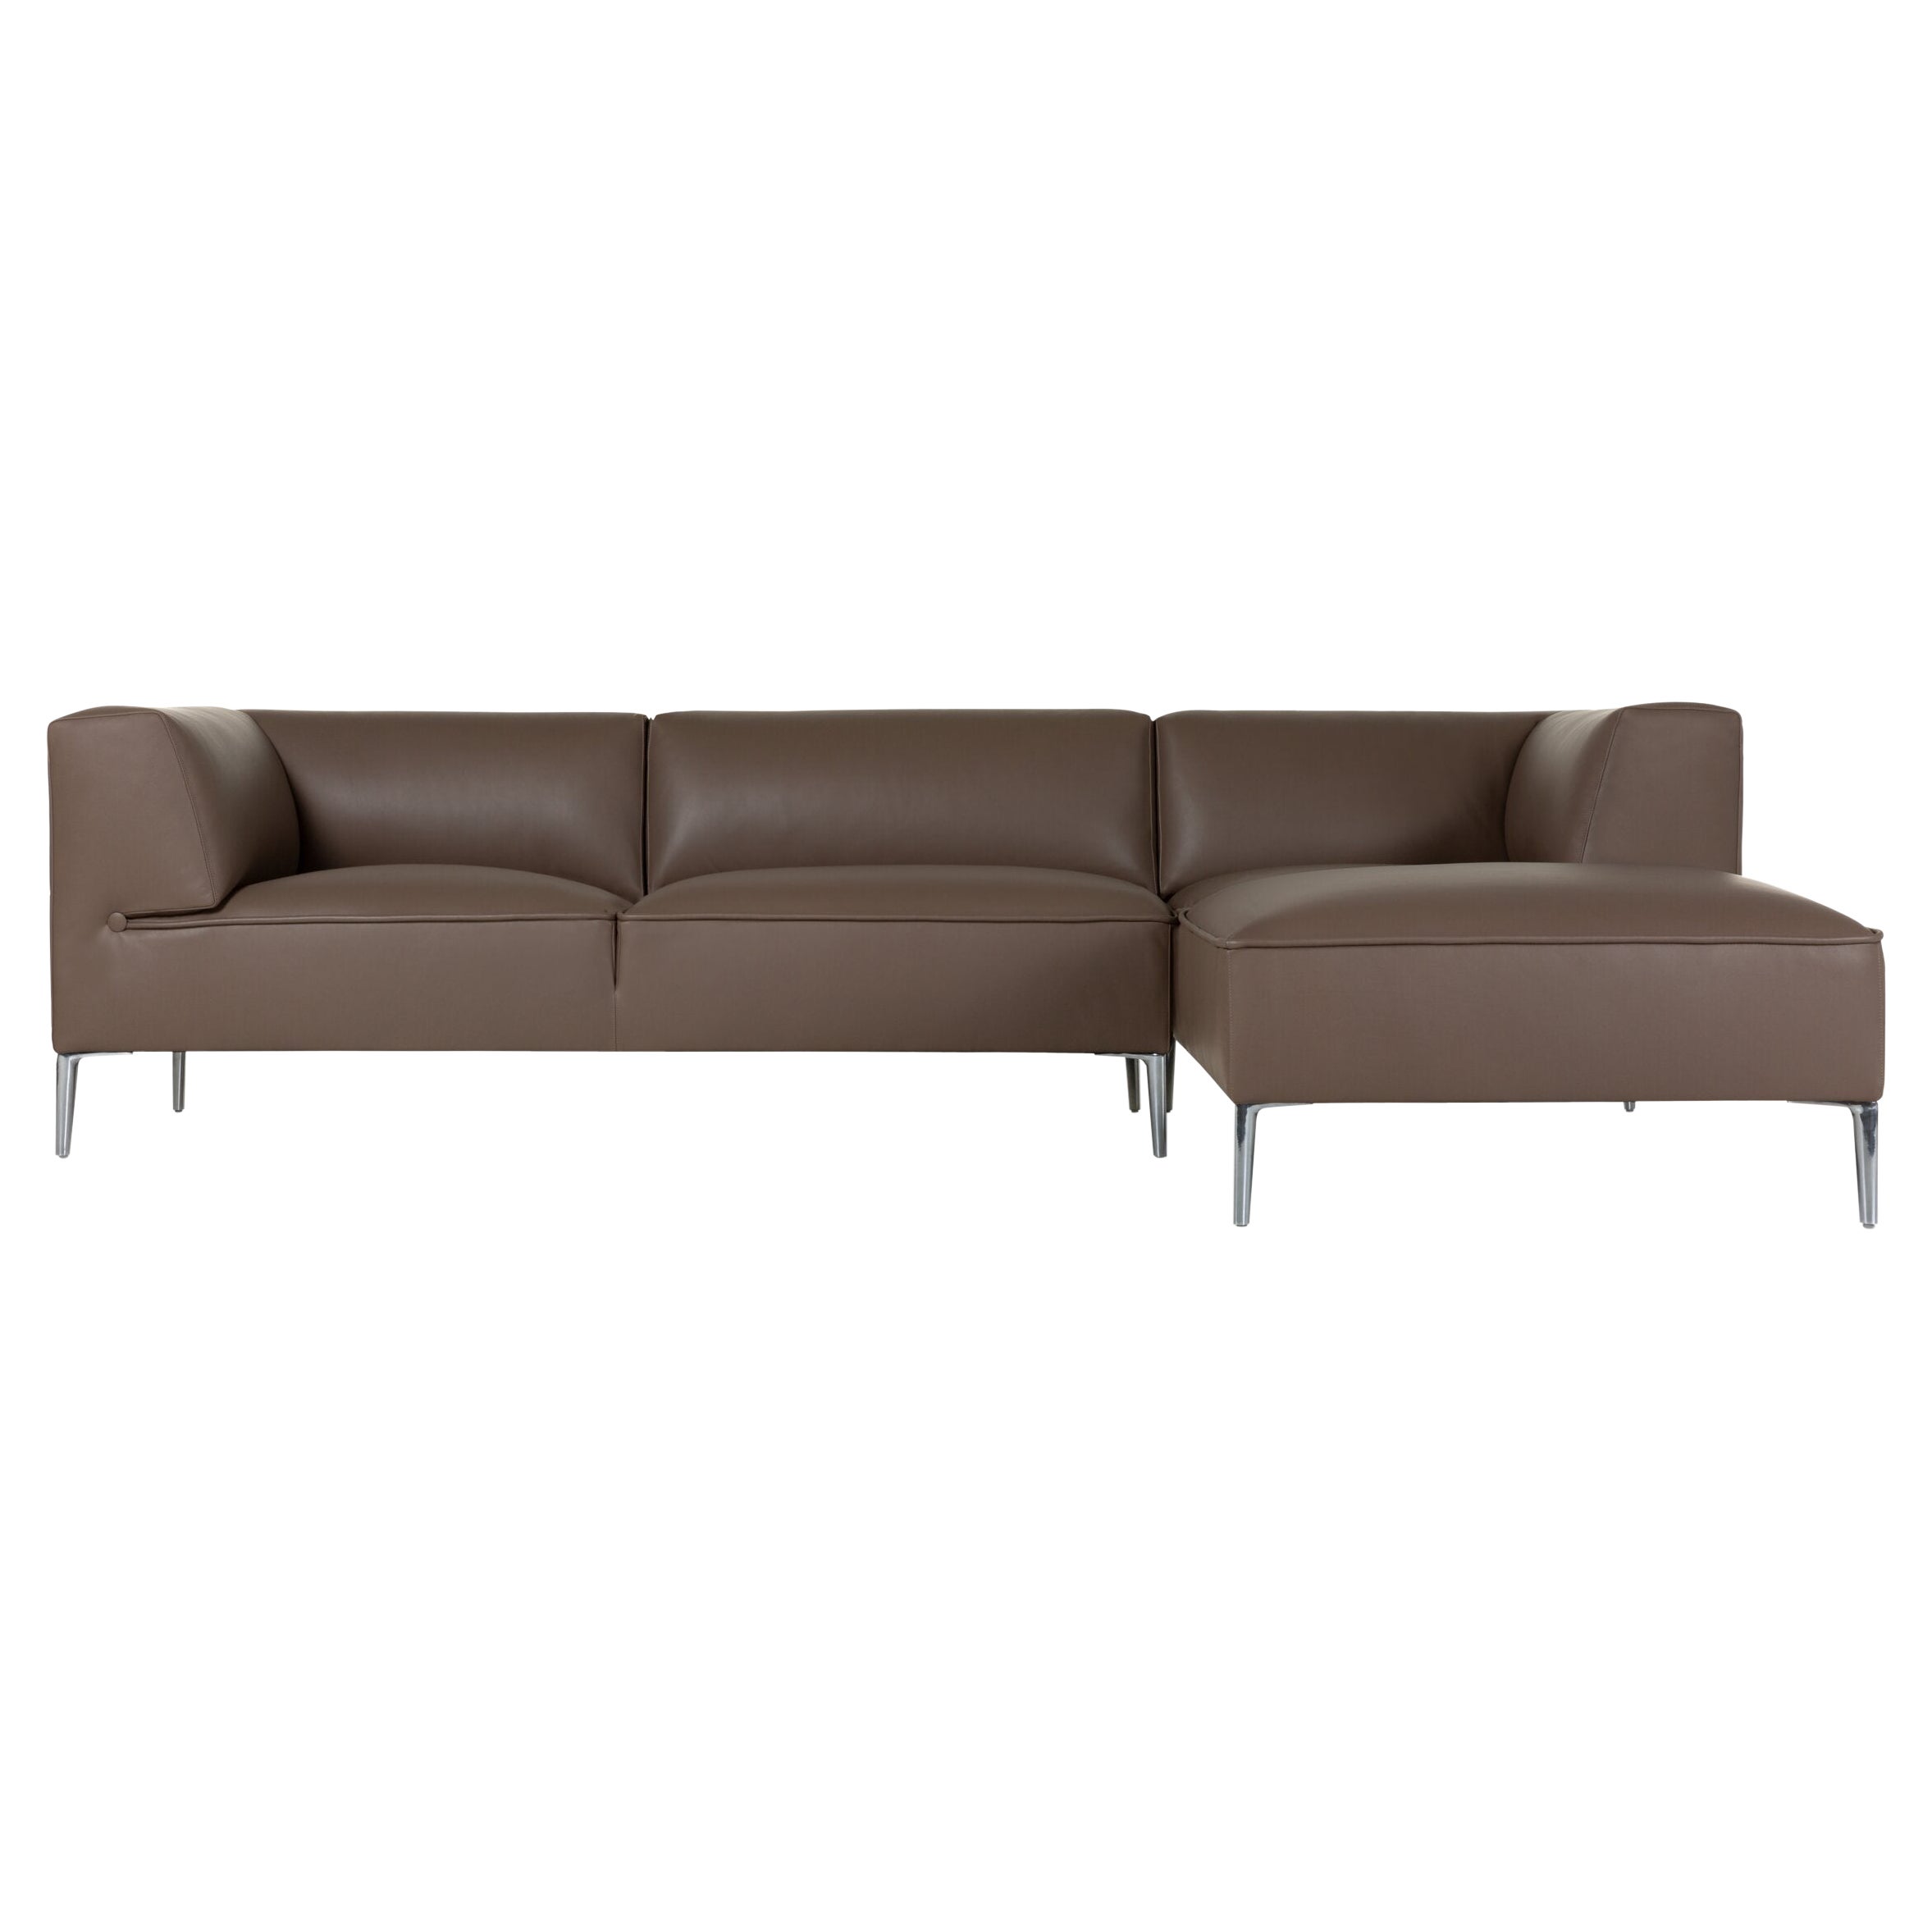 Moooi Sectional Sofa So Good in Shade Raw Umber Foam with Polished Aluminum Feet For Sale